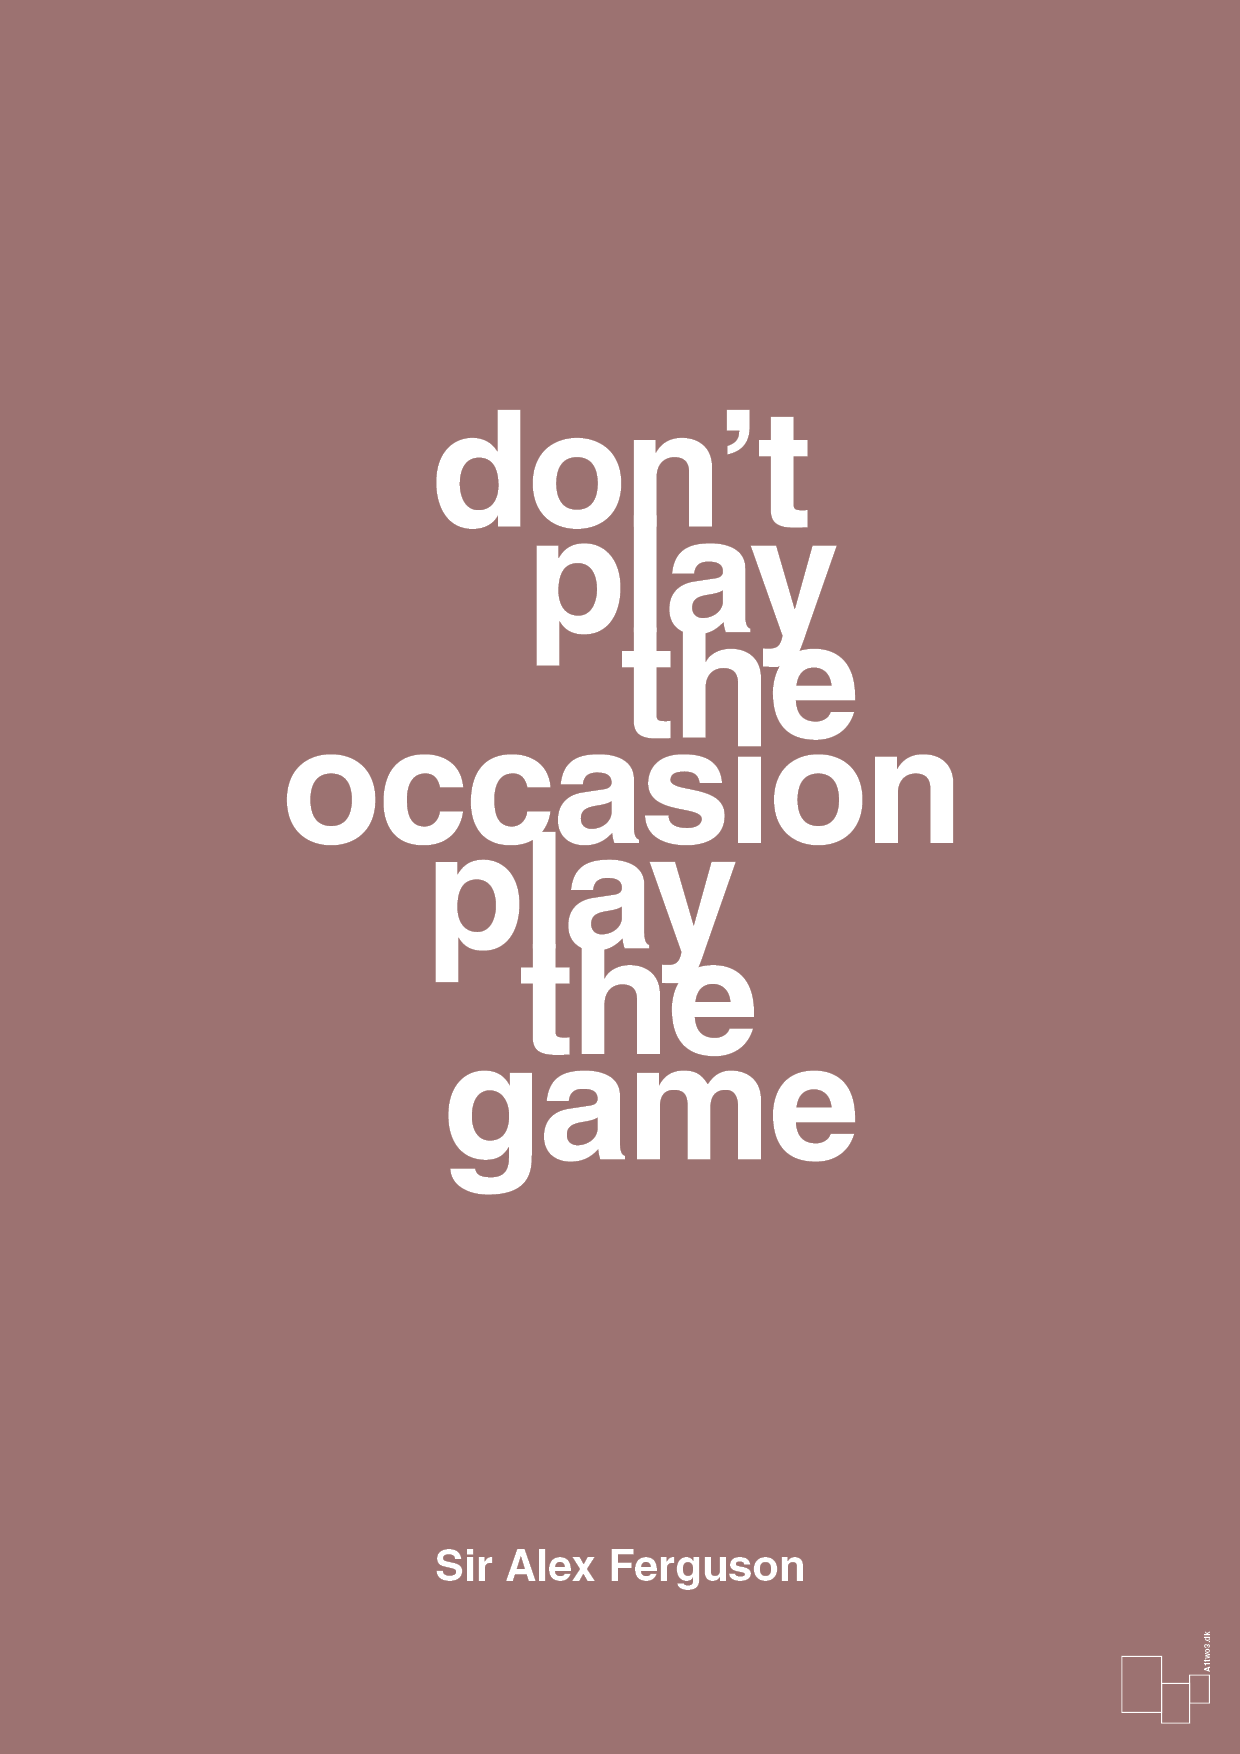 don’t play the occasion play the game - Plakat med Citater i Plum